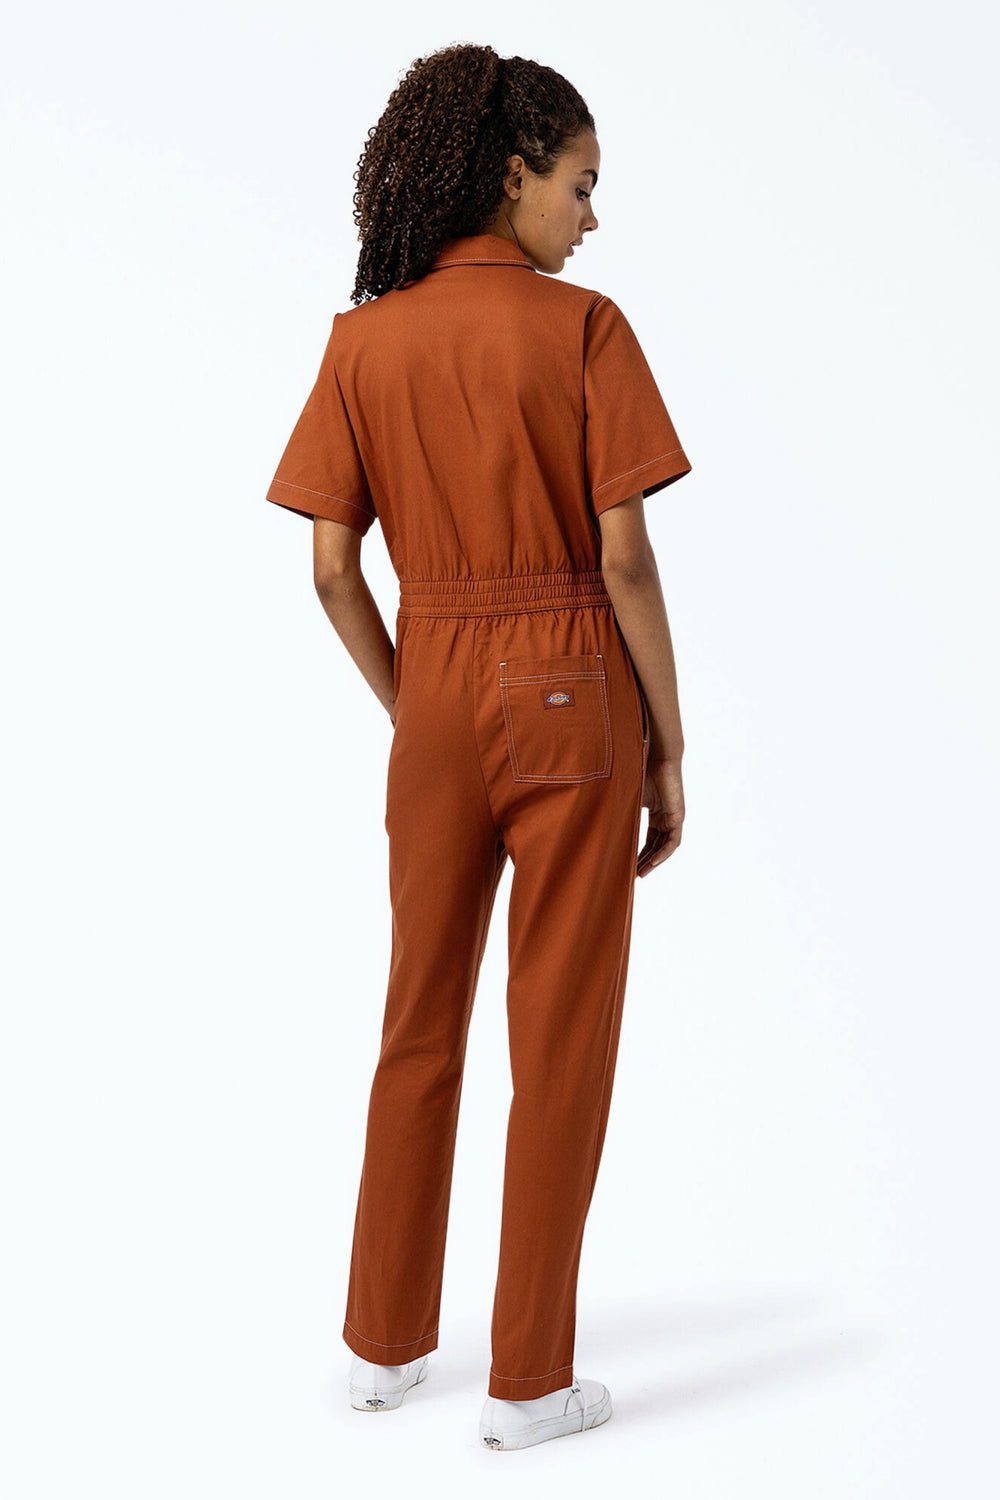 Gingerbread Short Sleeve Coverall